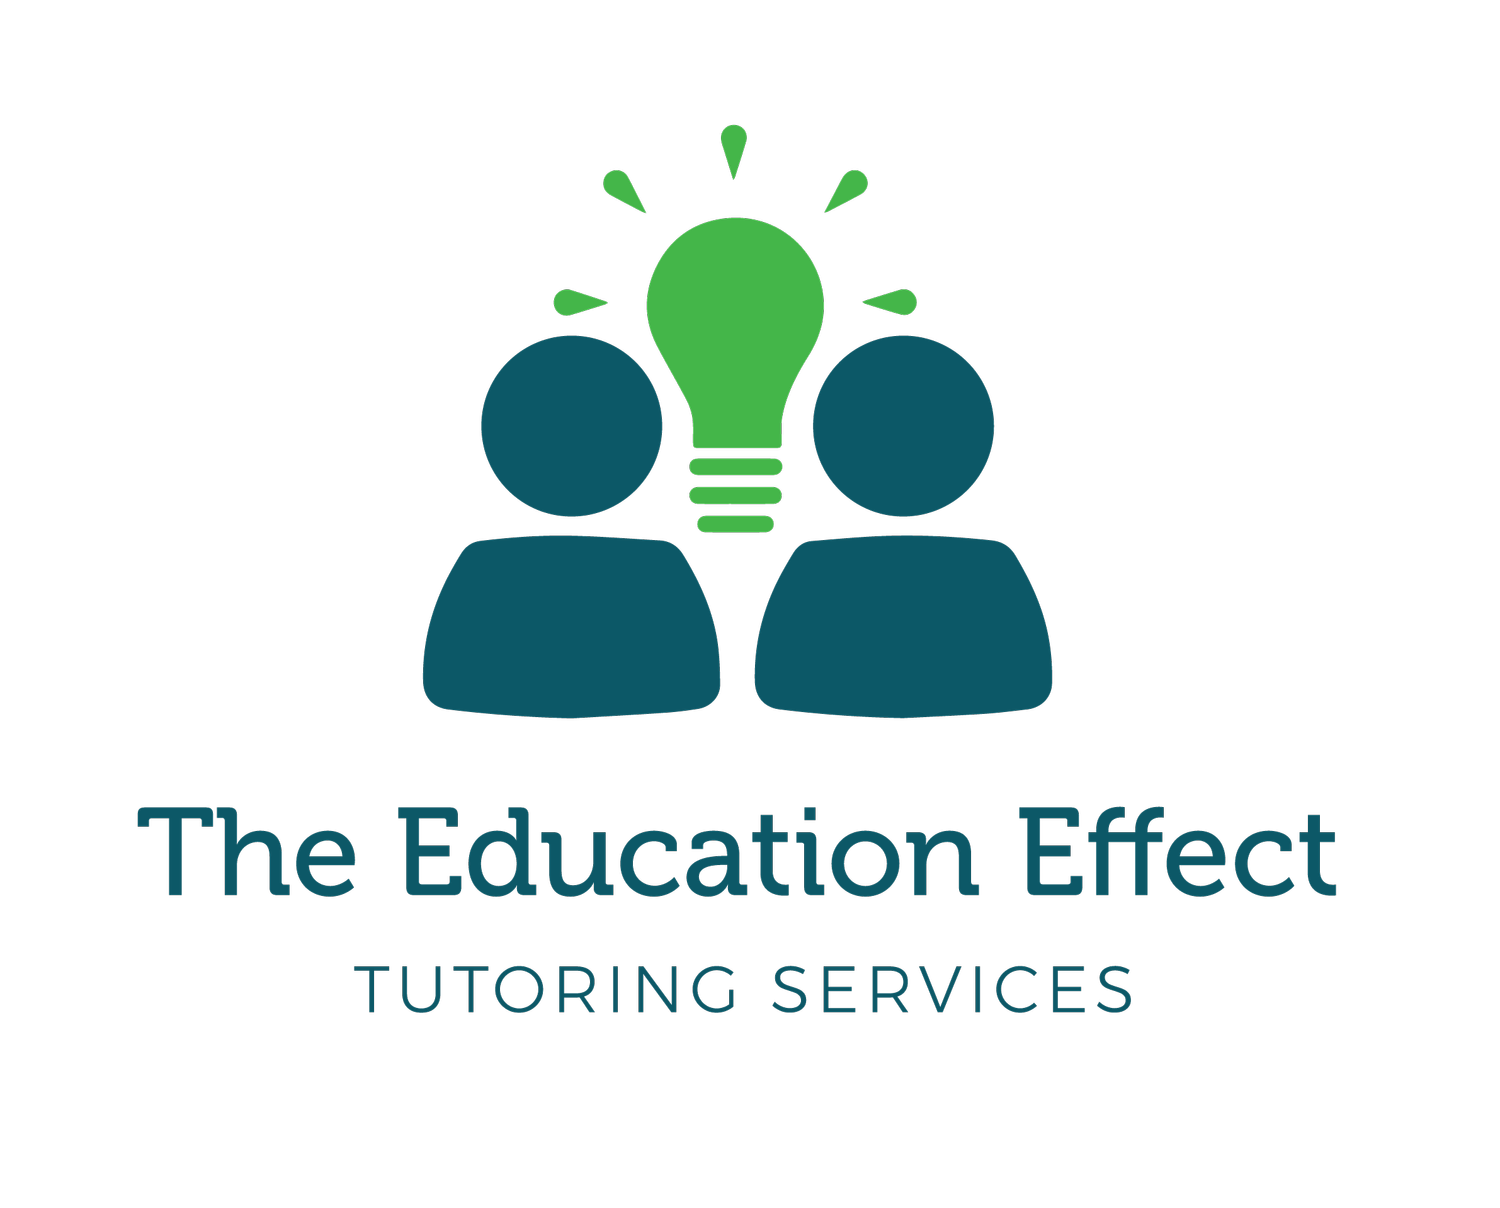 The Education Effect Tutoring